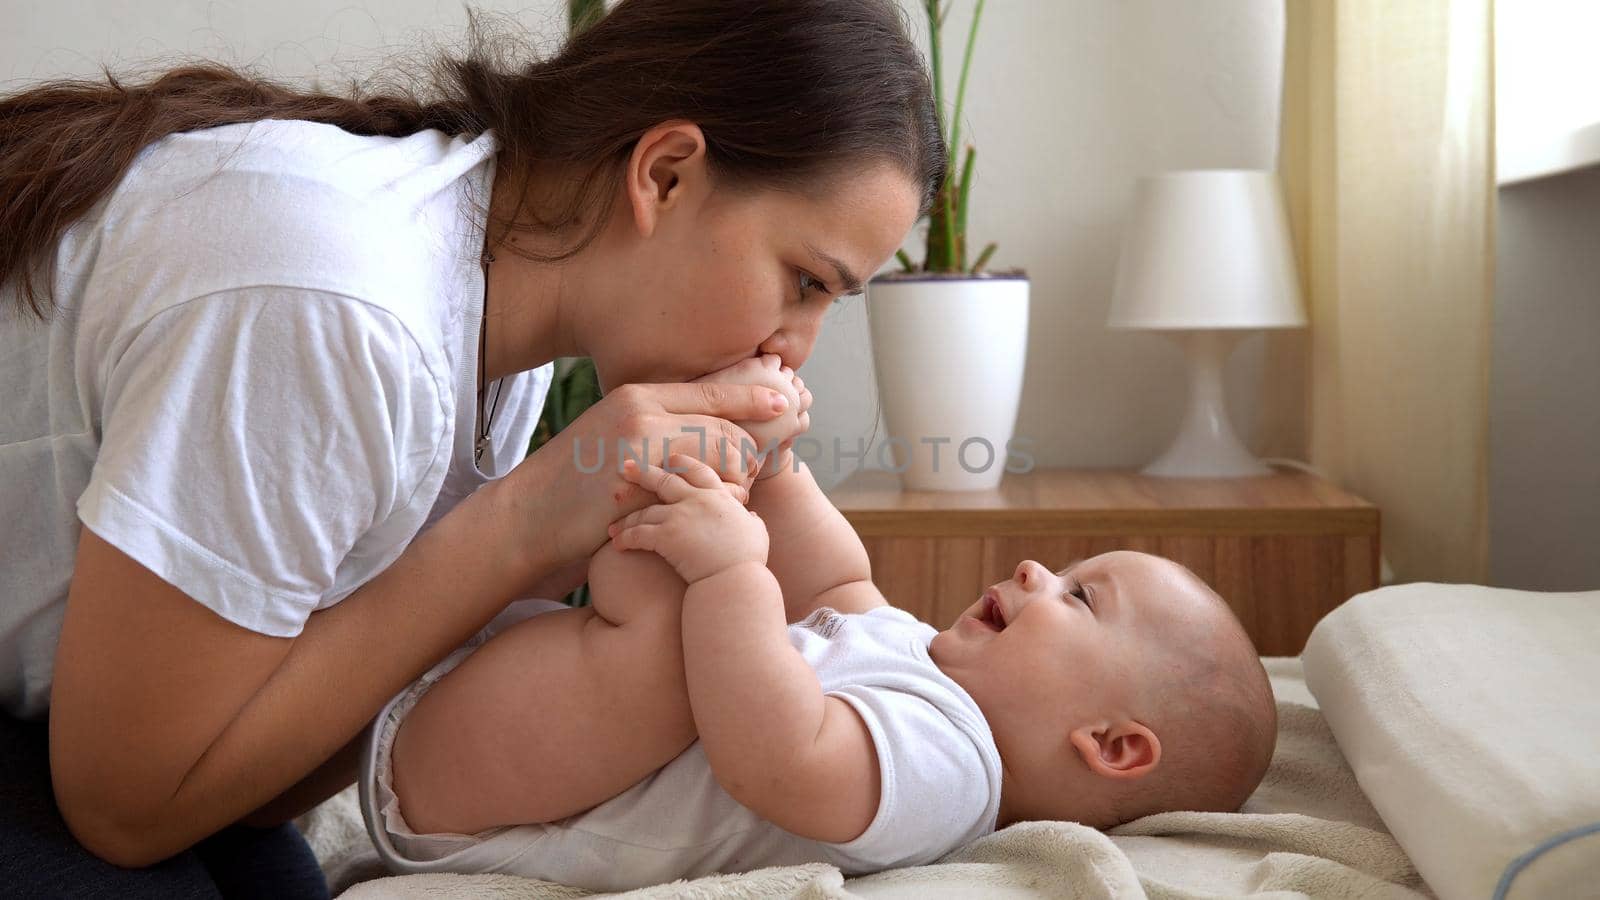 Authentic Young Caucasian Woman Holding Newborn Baby. Mom And Child On Bed. Close-up Portrait of Smiling Family With Infant On Hands. Happy Marriage Couple On Background. Childhood, Parenthood Concept by mytrykau